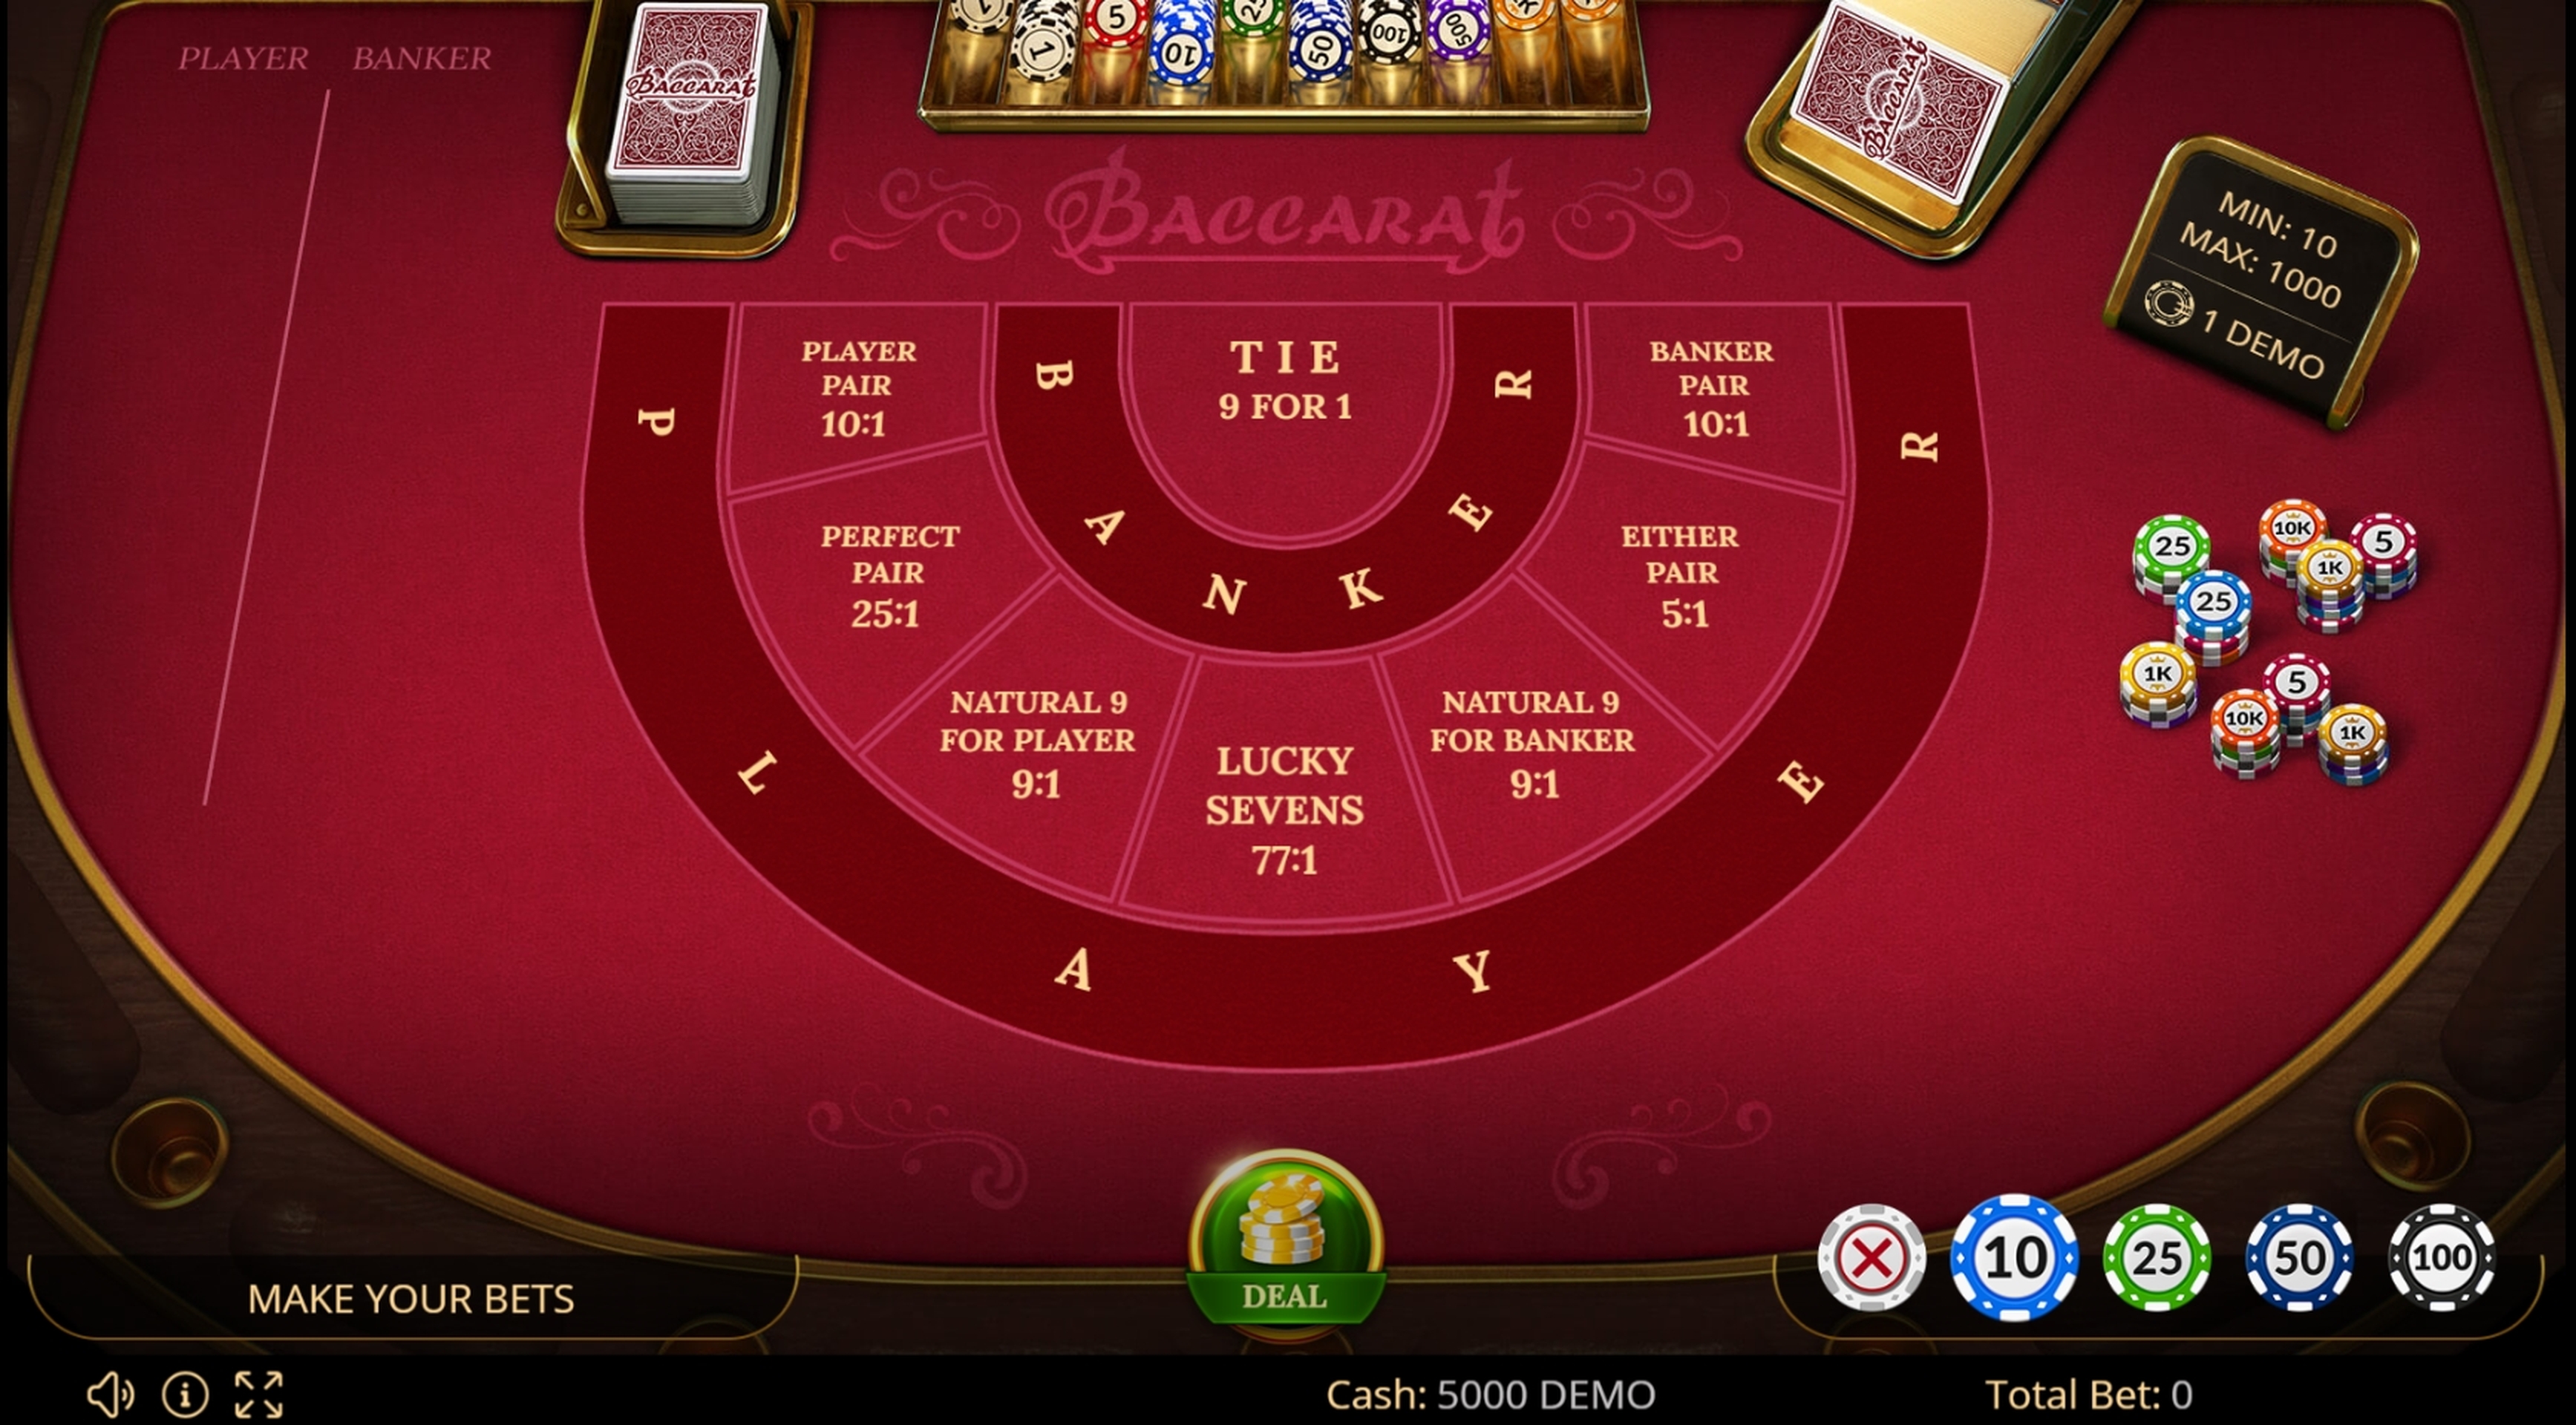 Reels in Baccarat 777 Slot Game by Evoplay Entertainment